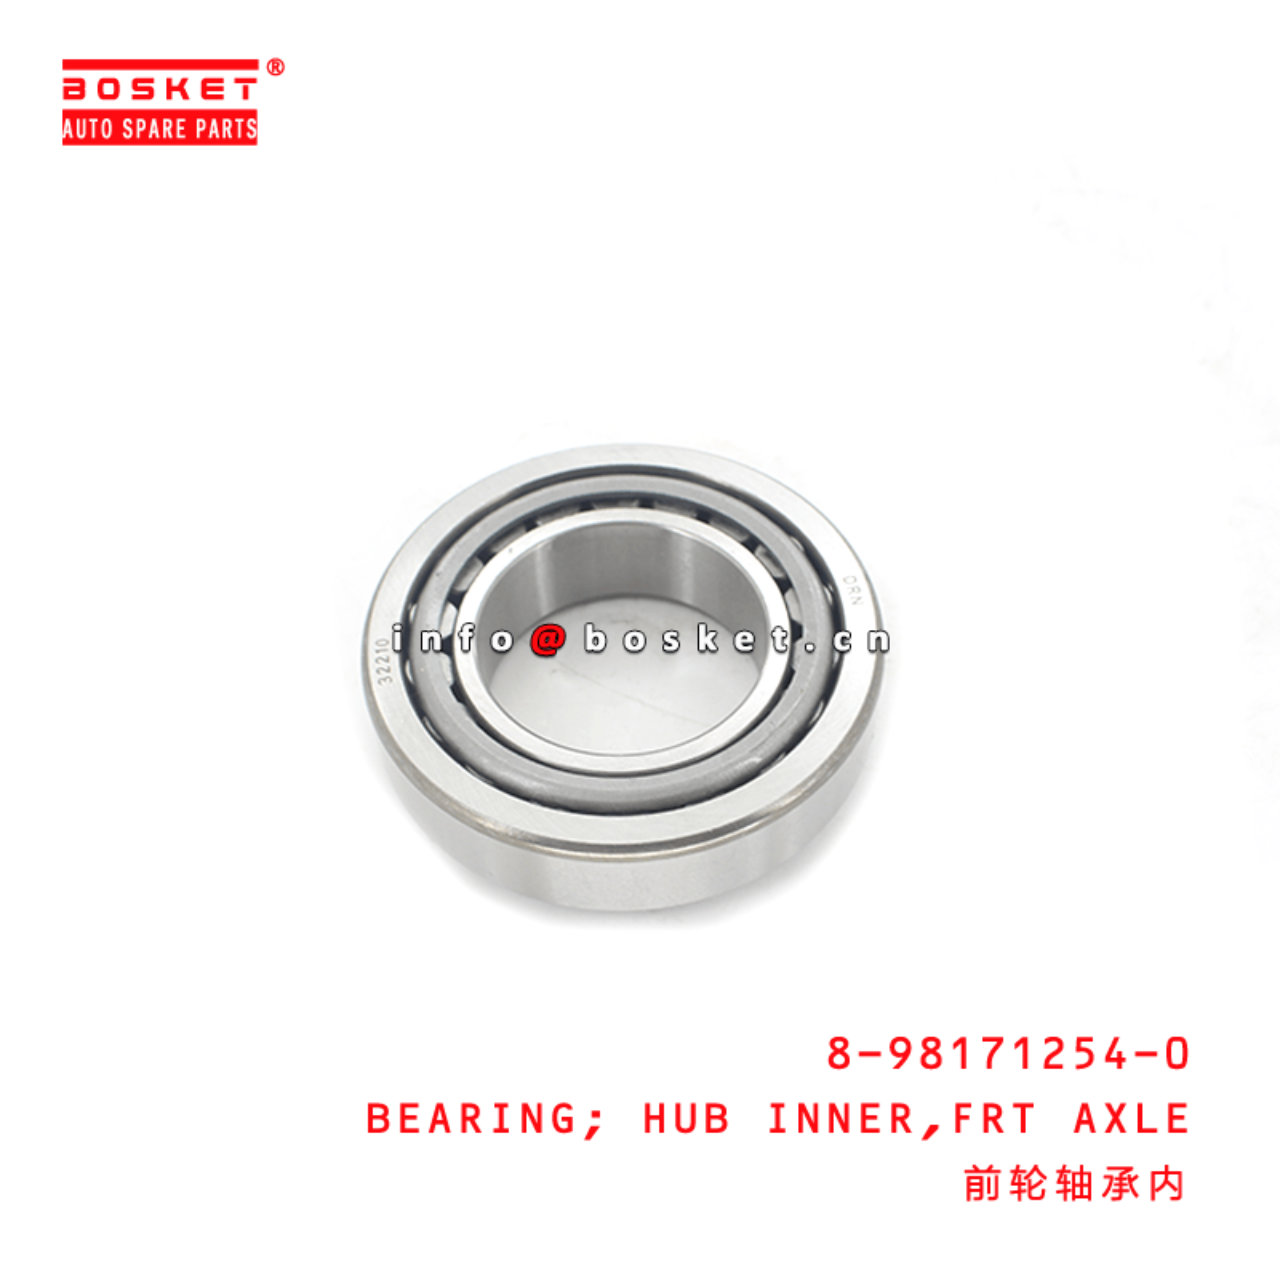 8-98171254-0 Front Axle Hub Inner Bearing 8981712540 Suitable for ISUZU VC46 4HK1